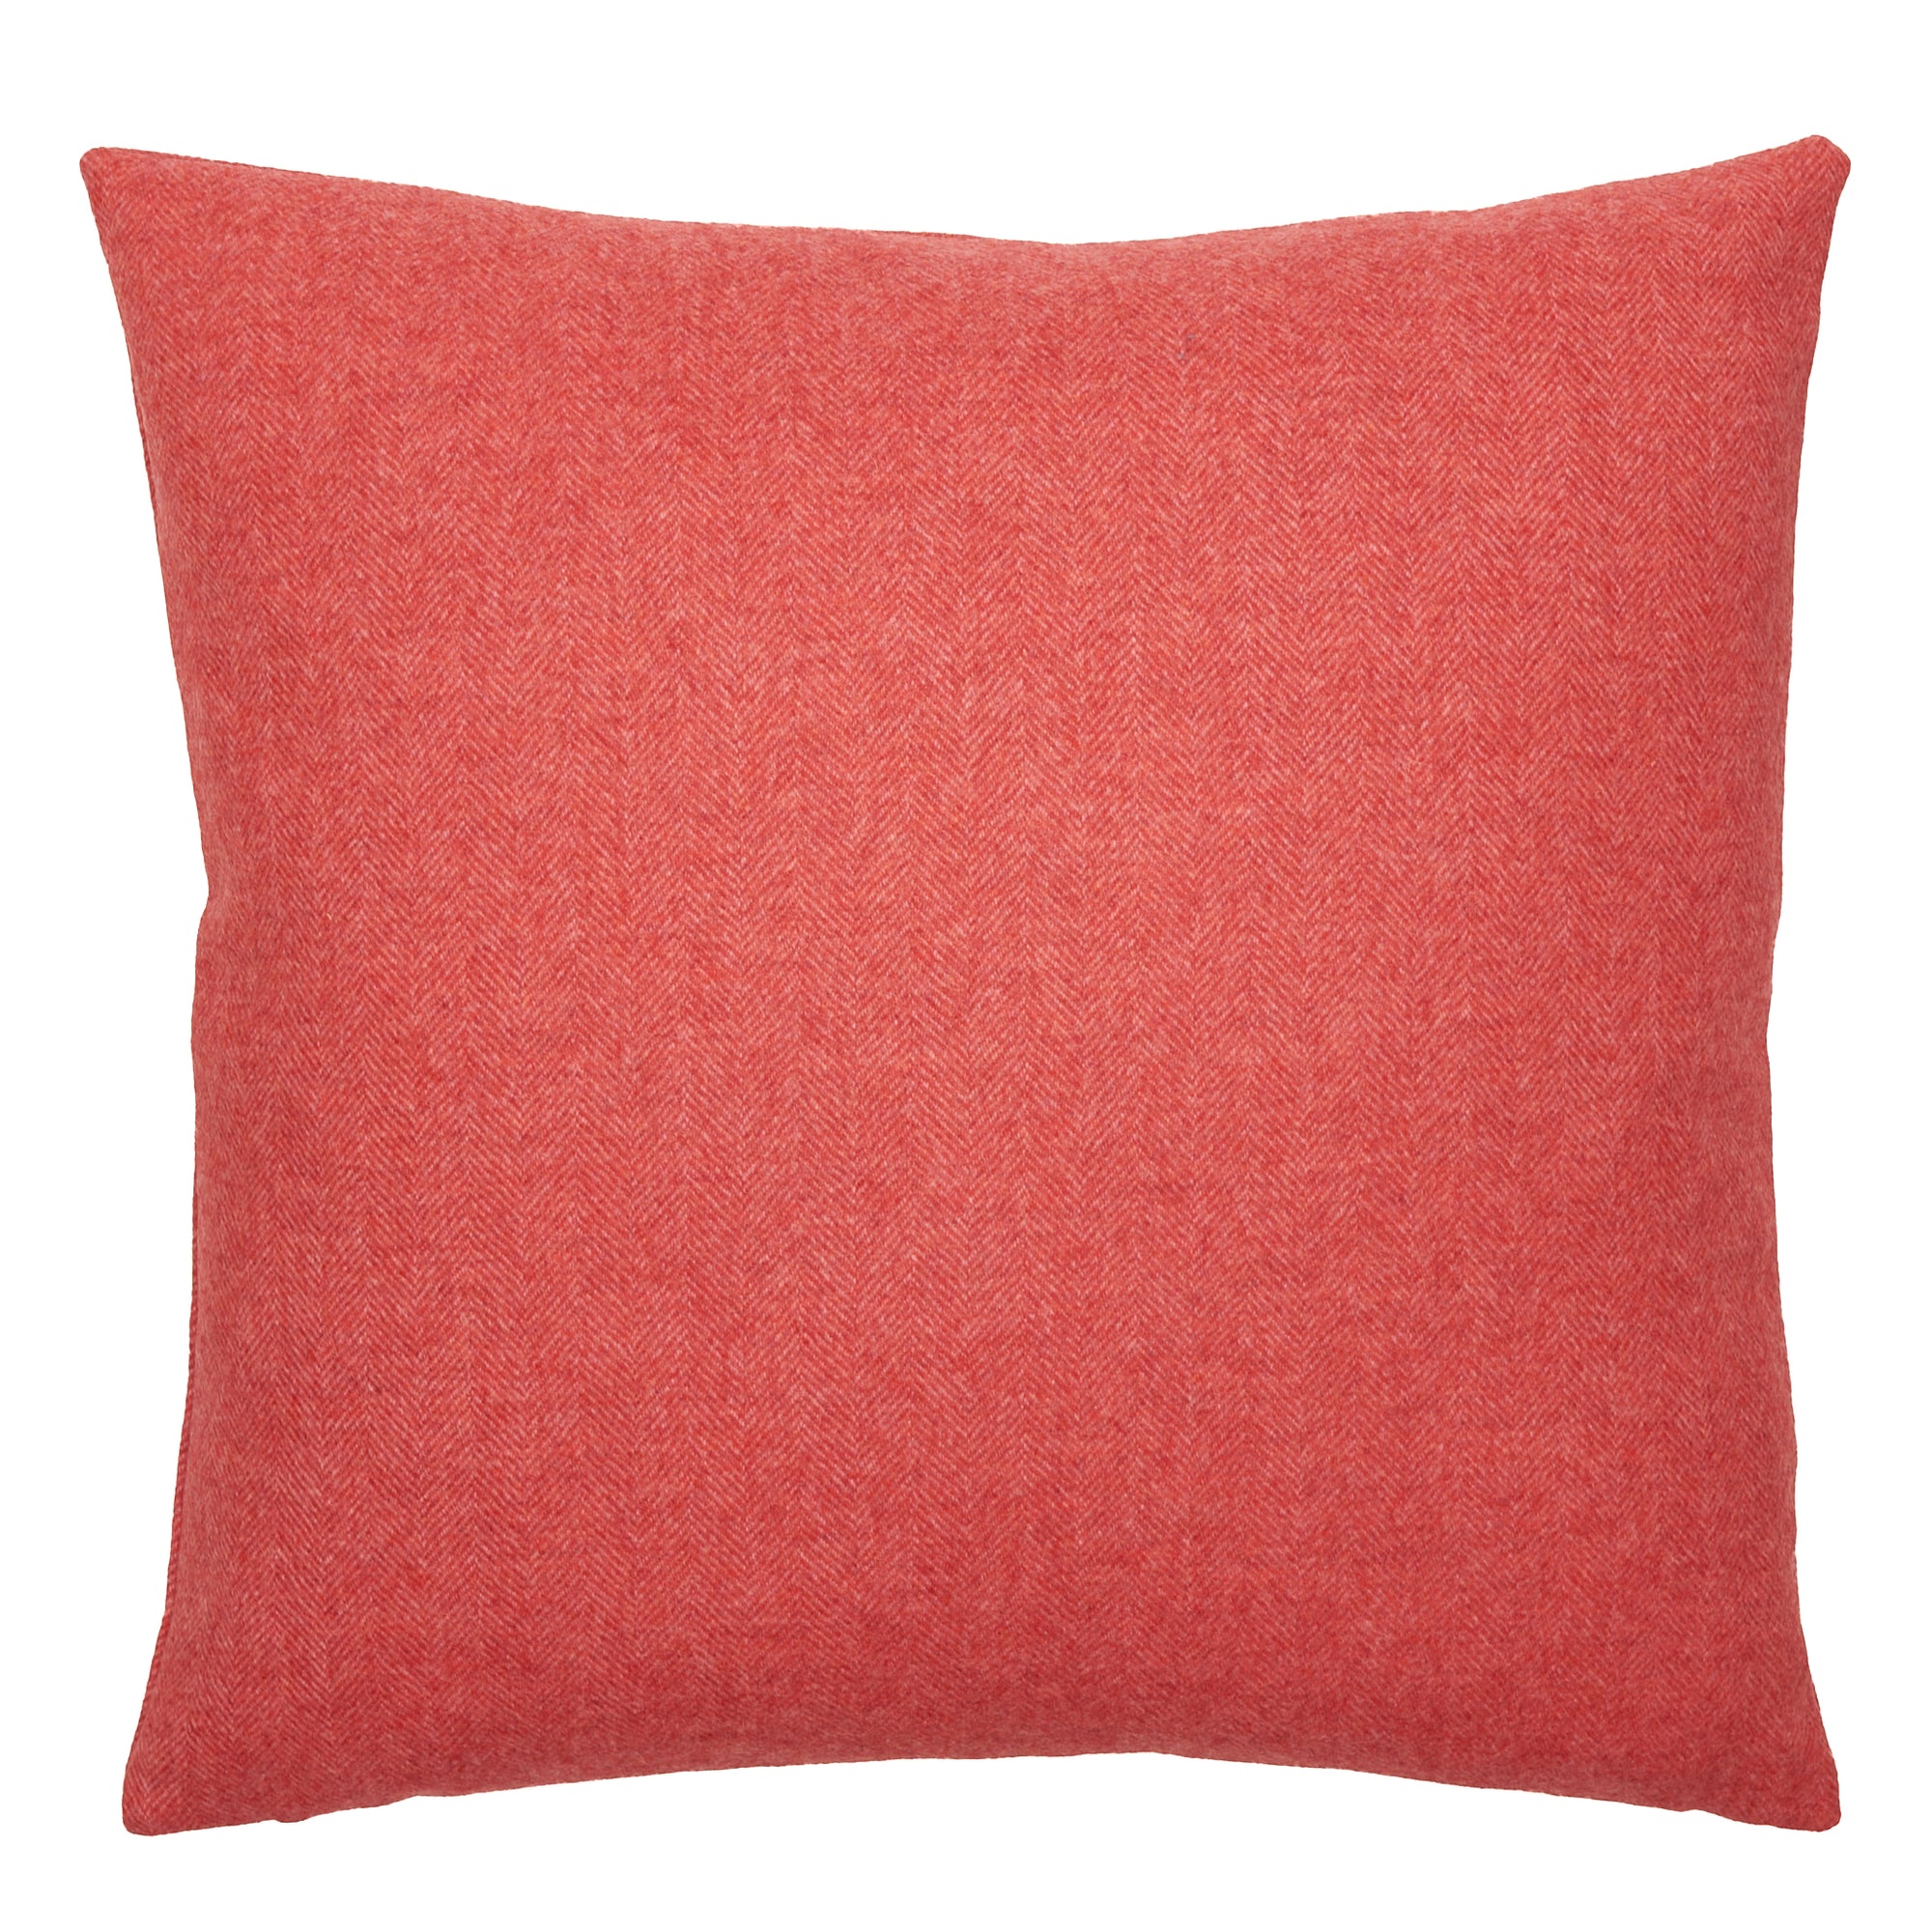 Flamingo pink wool cushion made in UK with Abraham Moon Wool